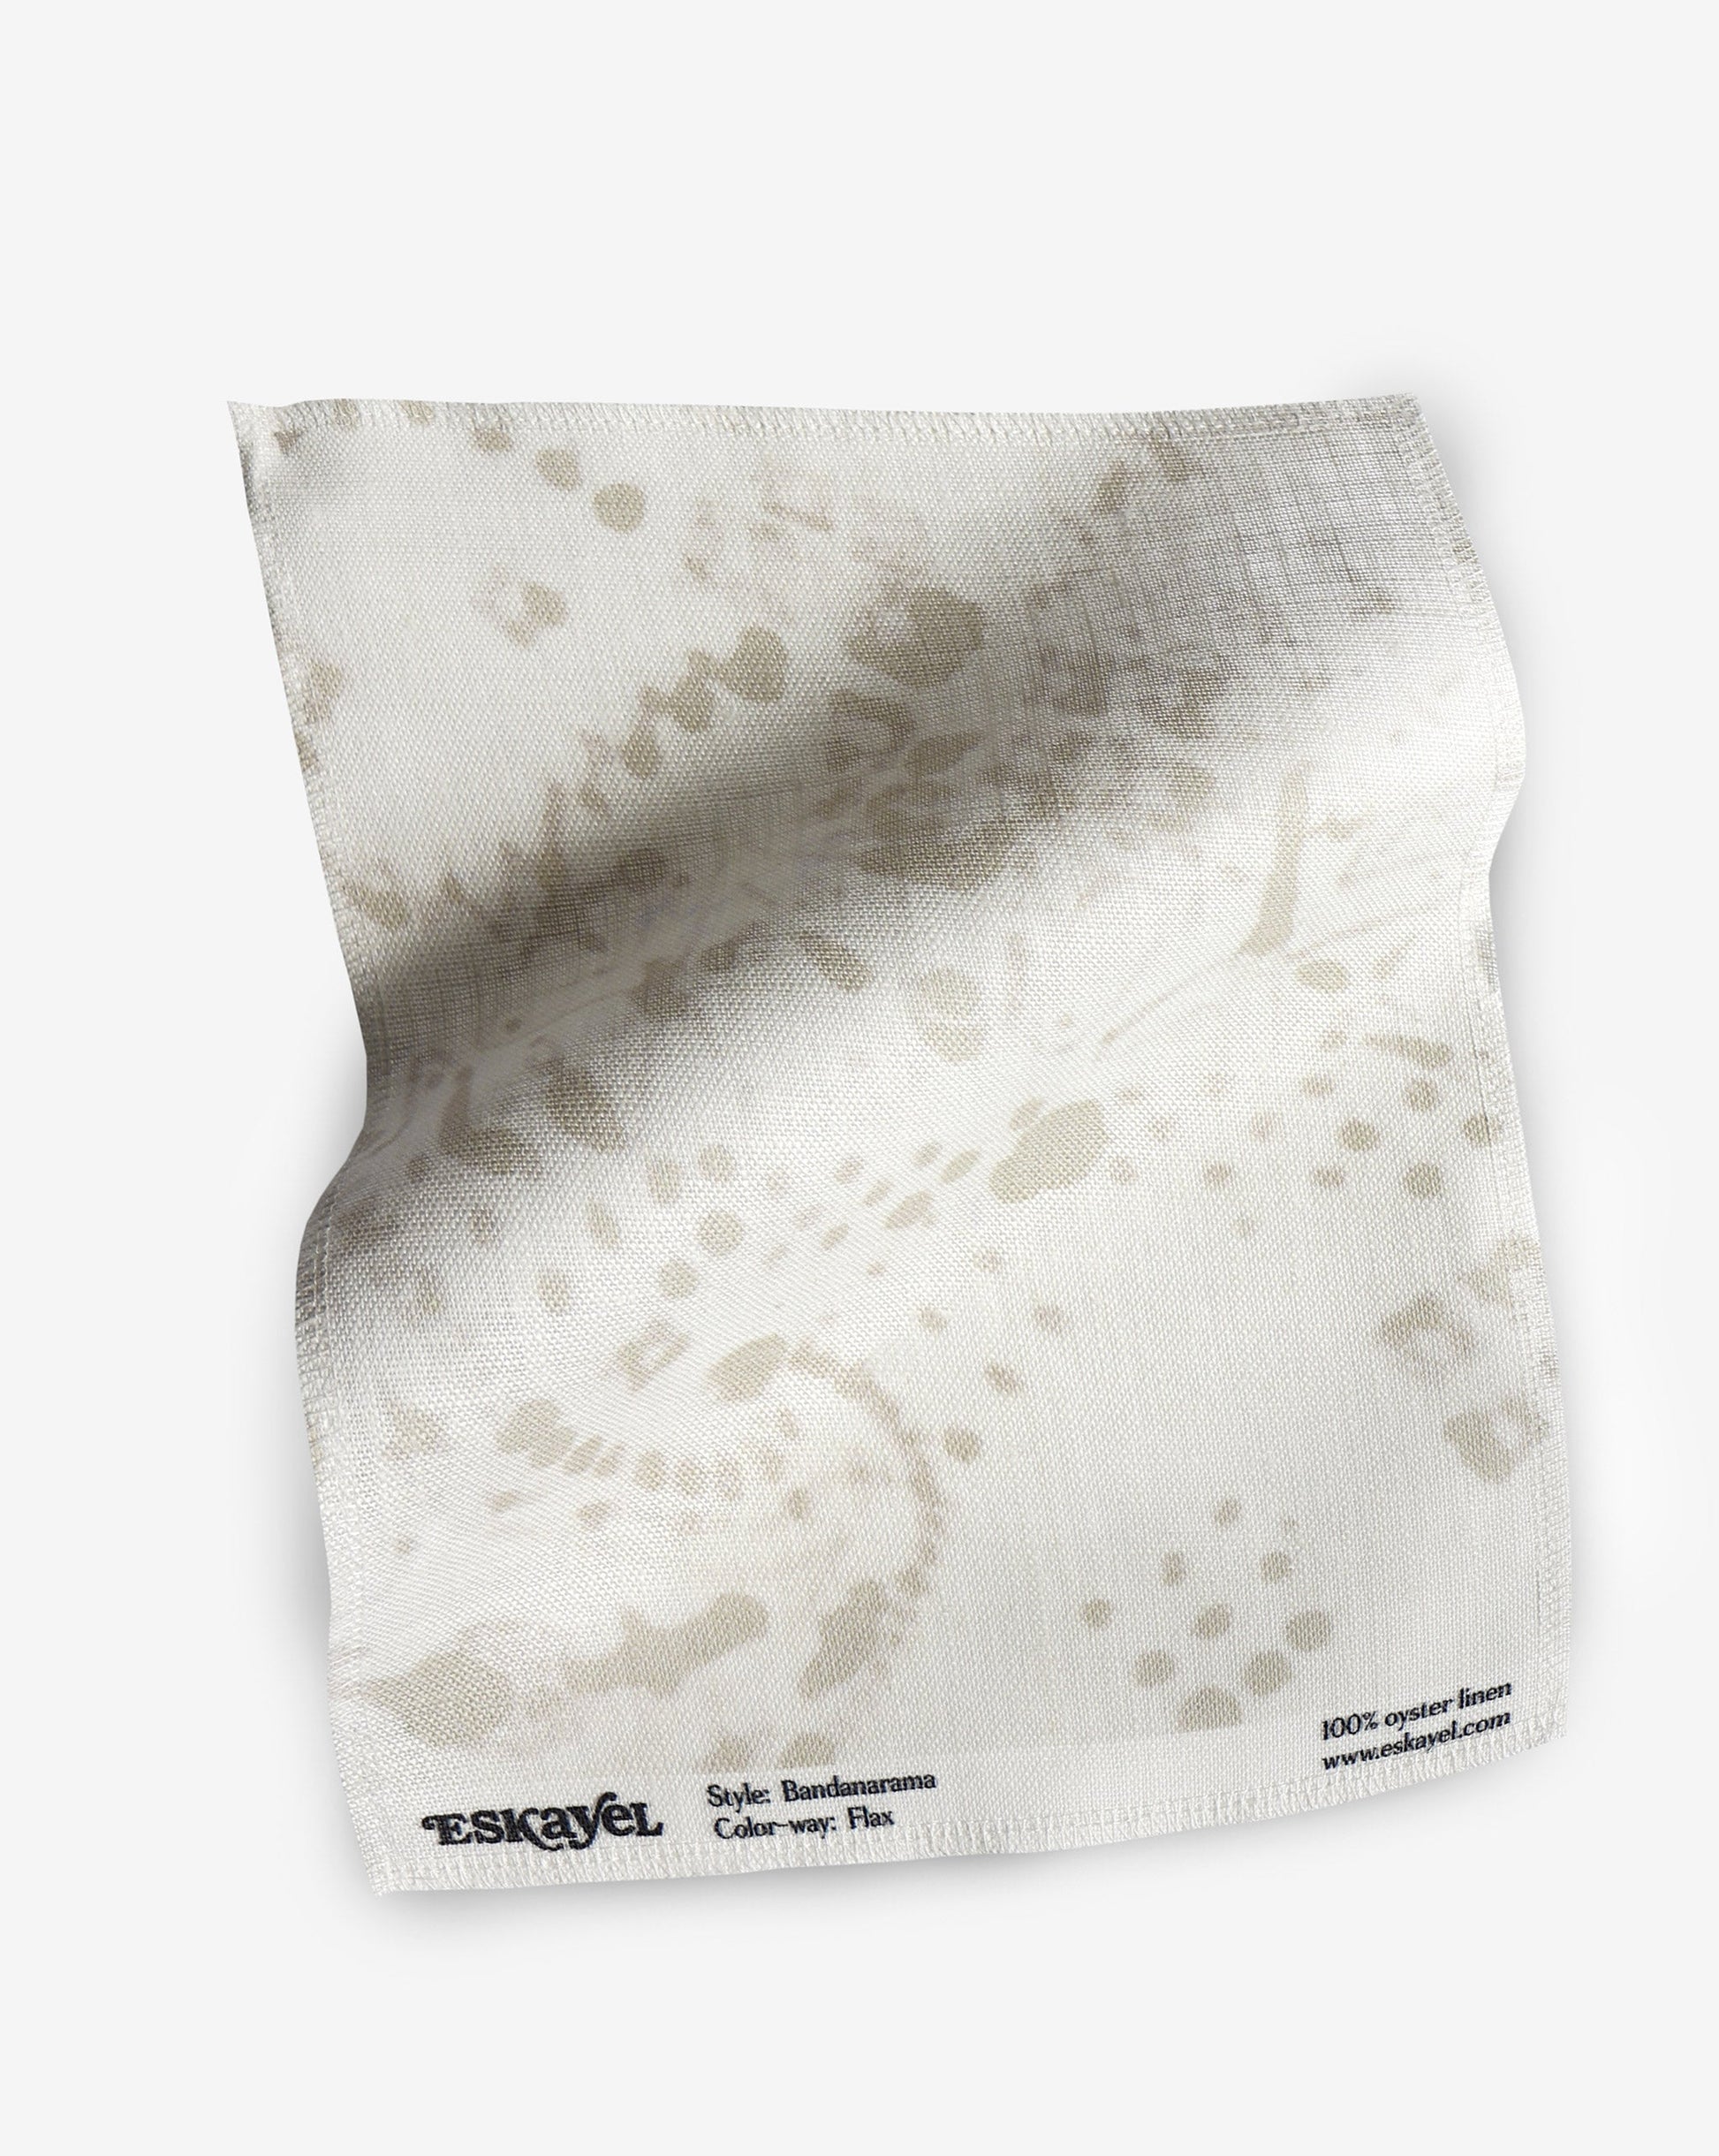 A fabric with our bandanarama pattern featuring a traditional bandana design in beige and white.